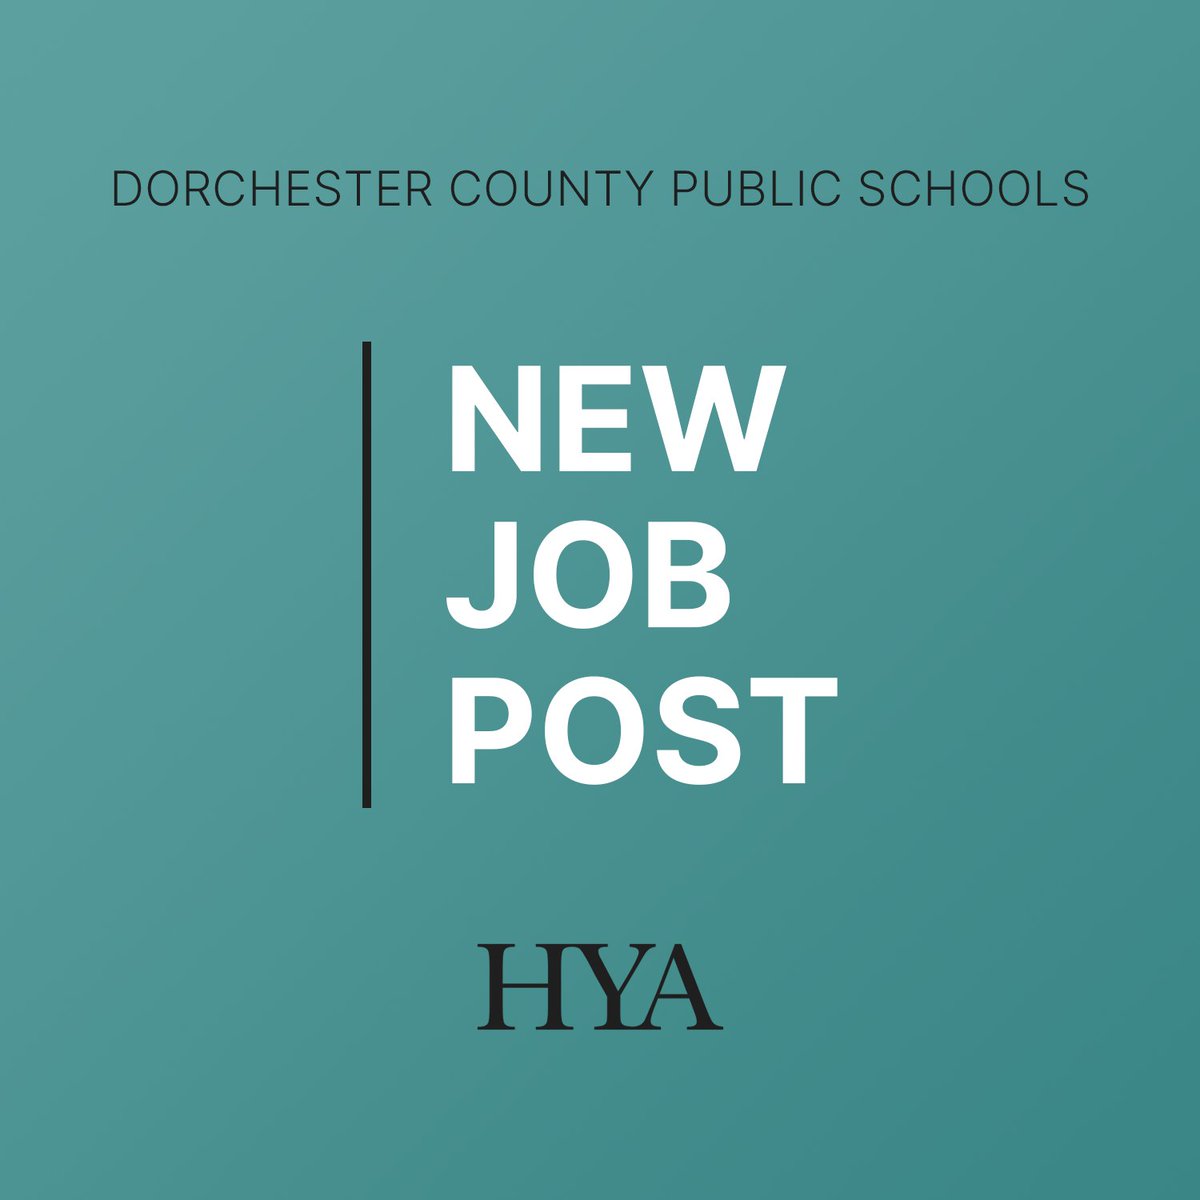 Apply today! #superintendent Dorchester County Public Schools, MD Deadline to apply: May 10, 2024 bit.ly/4a9Mx0h

#HYAsearch #Education #Jobs #EducationJobs #suptchat #edleadership #edadmin